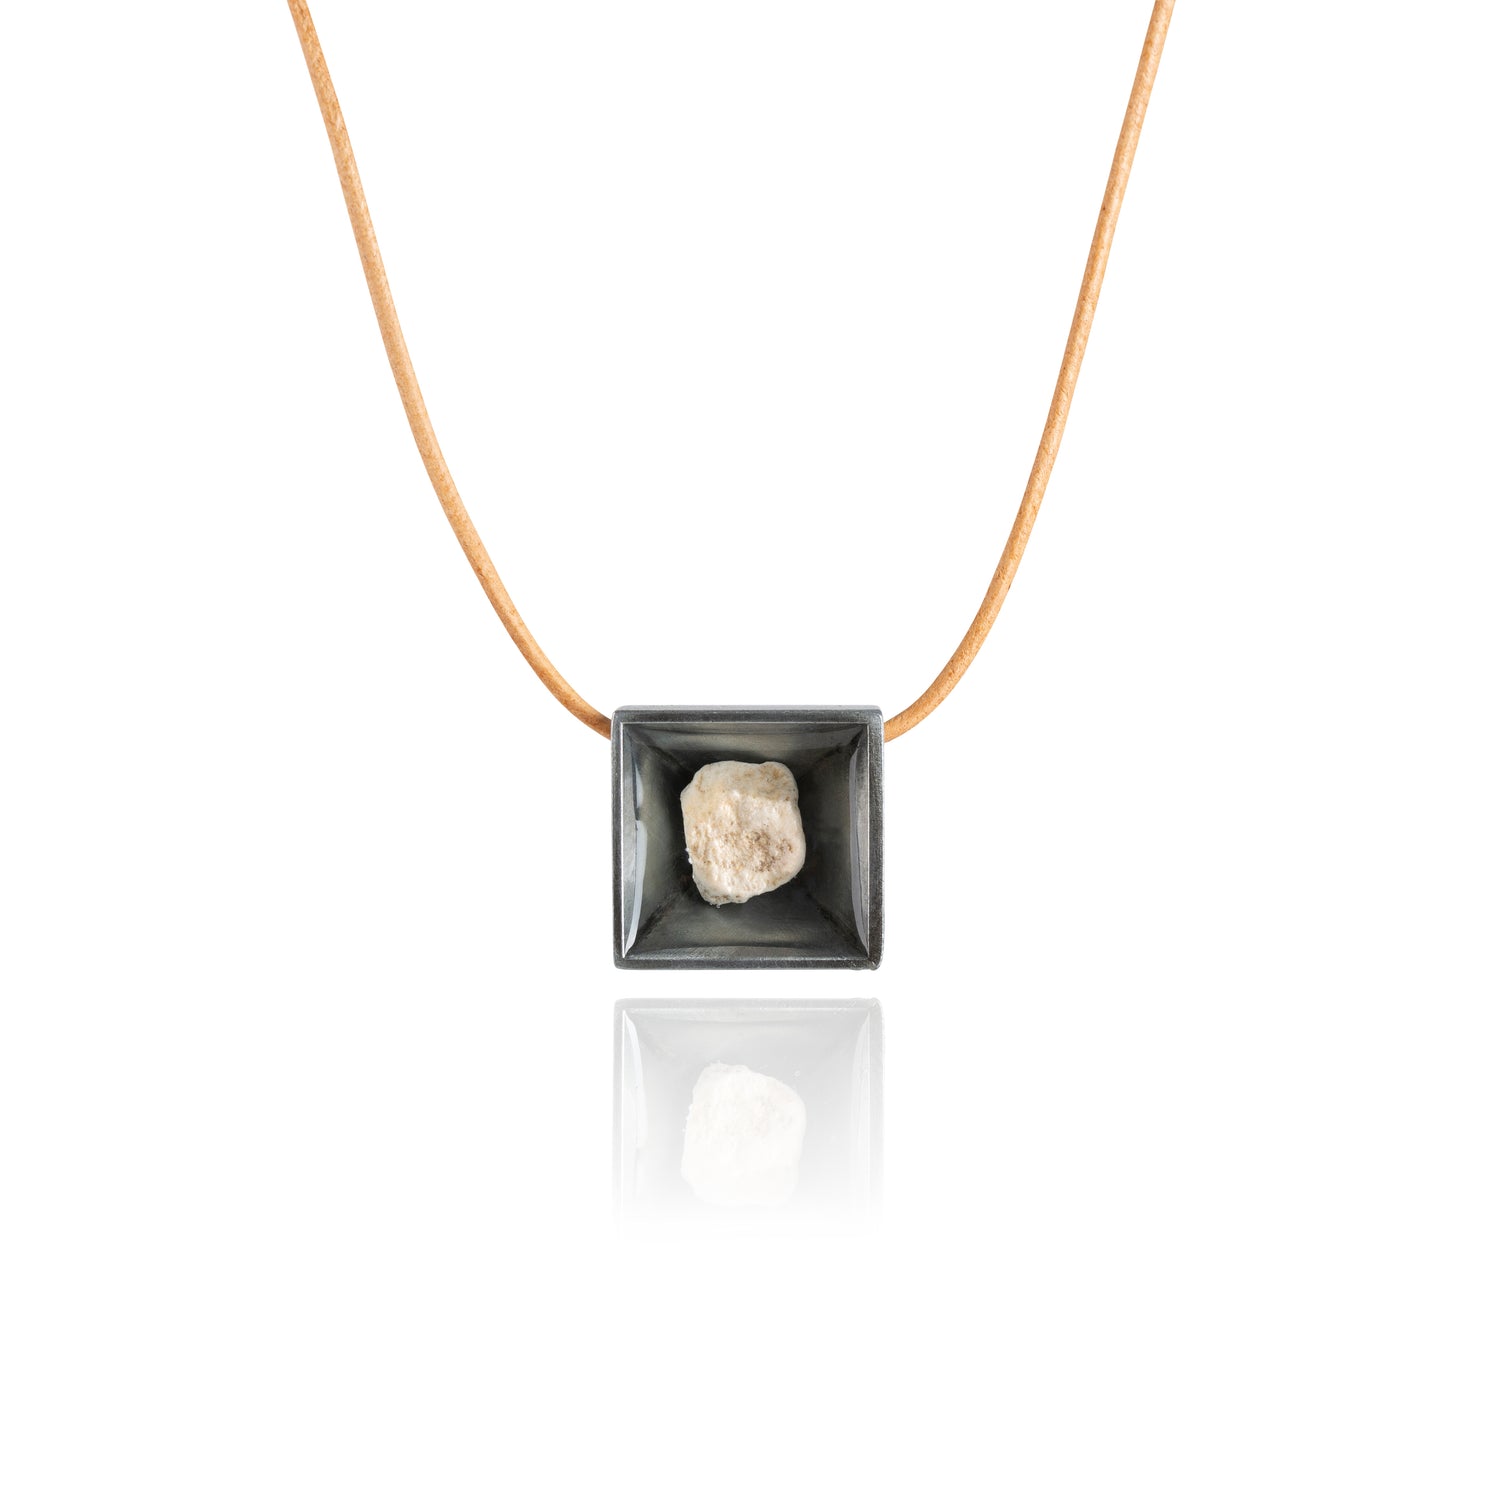 A small natural tan stone sitting in the middle of a square shaped metal pendant in a dark silver color. The pendant is hanging on a tan leather necklace.